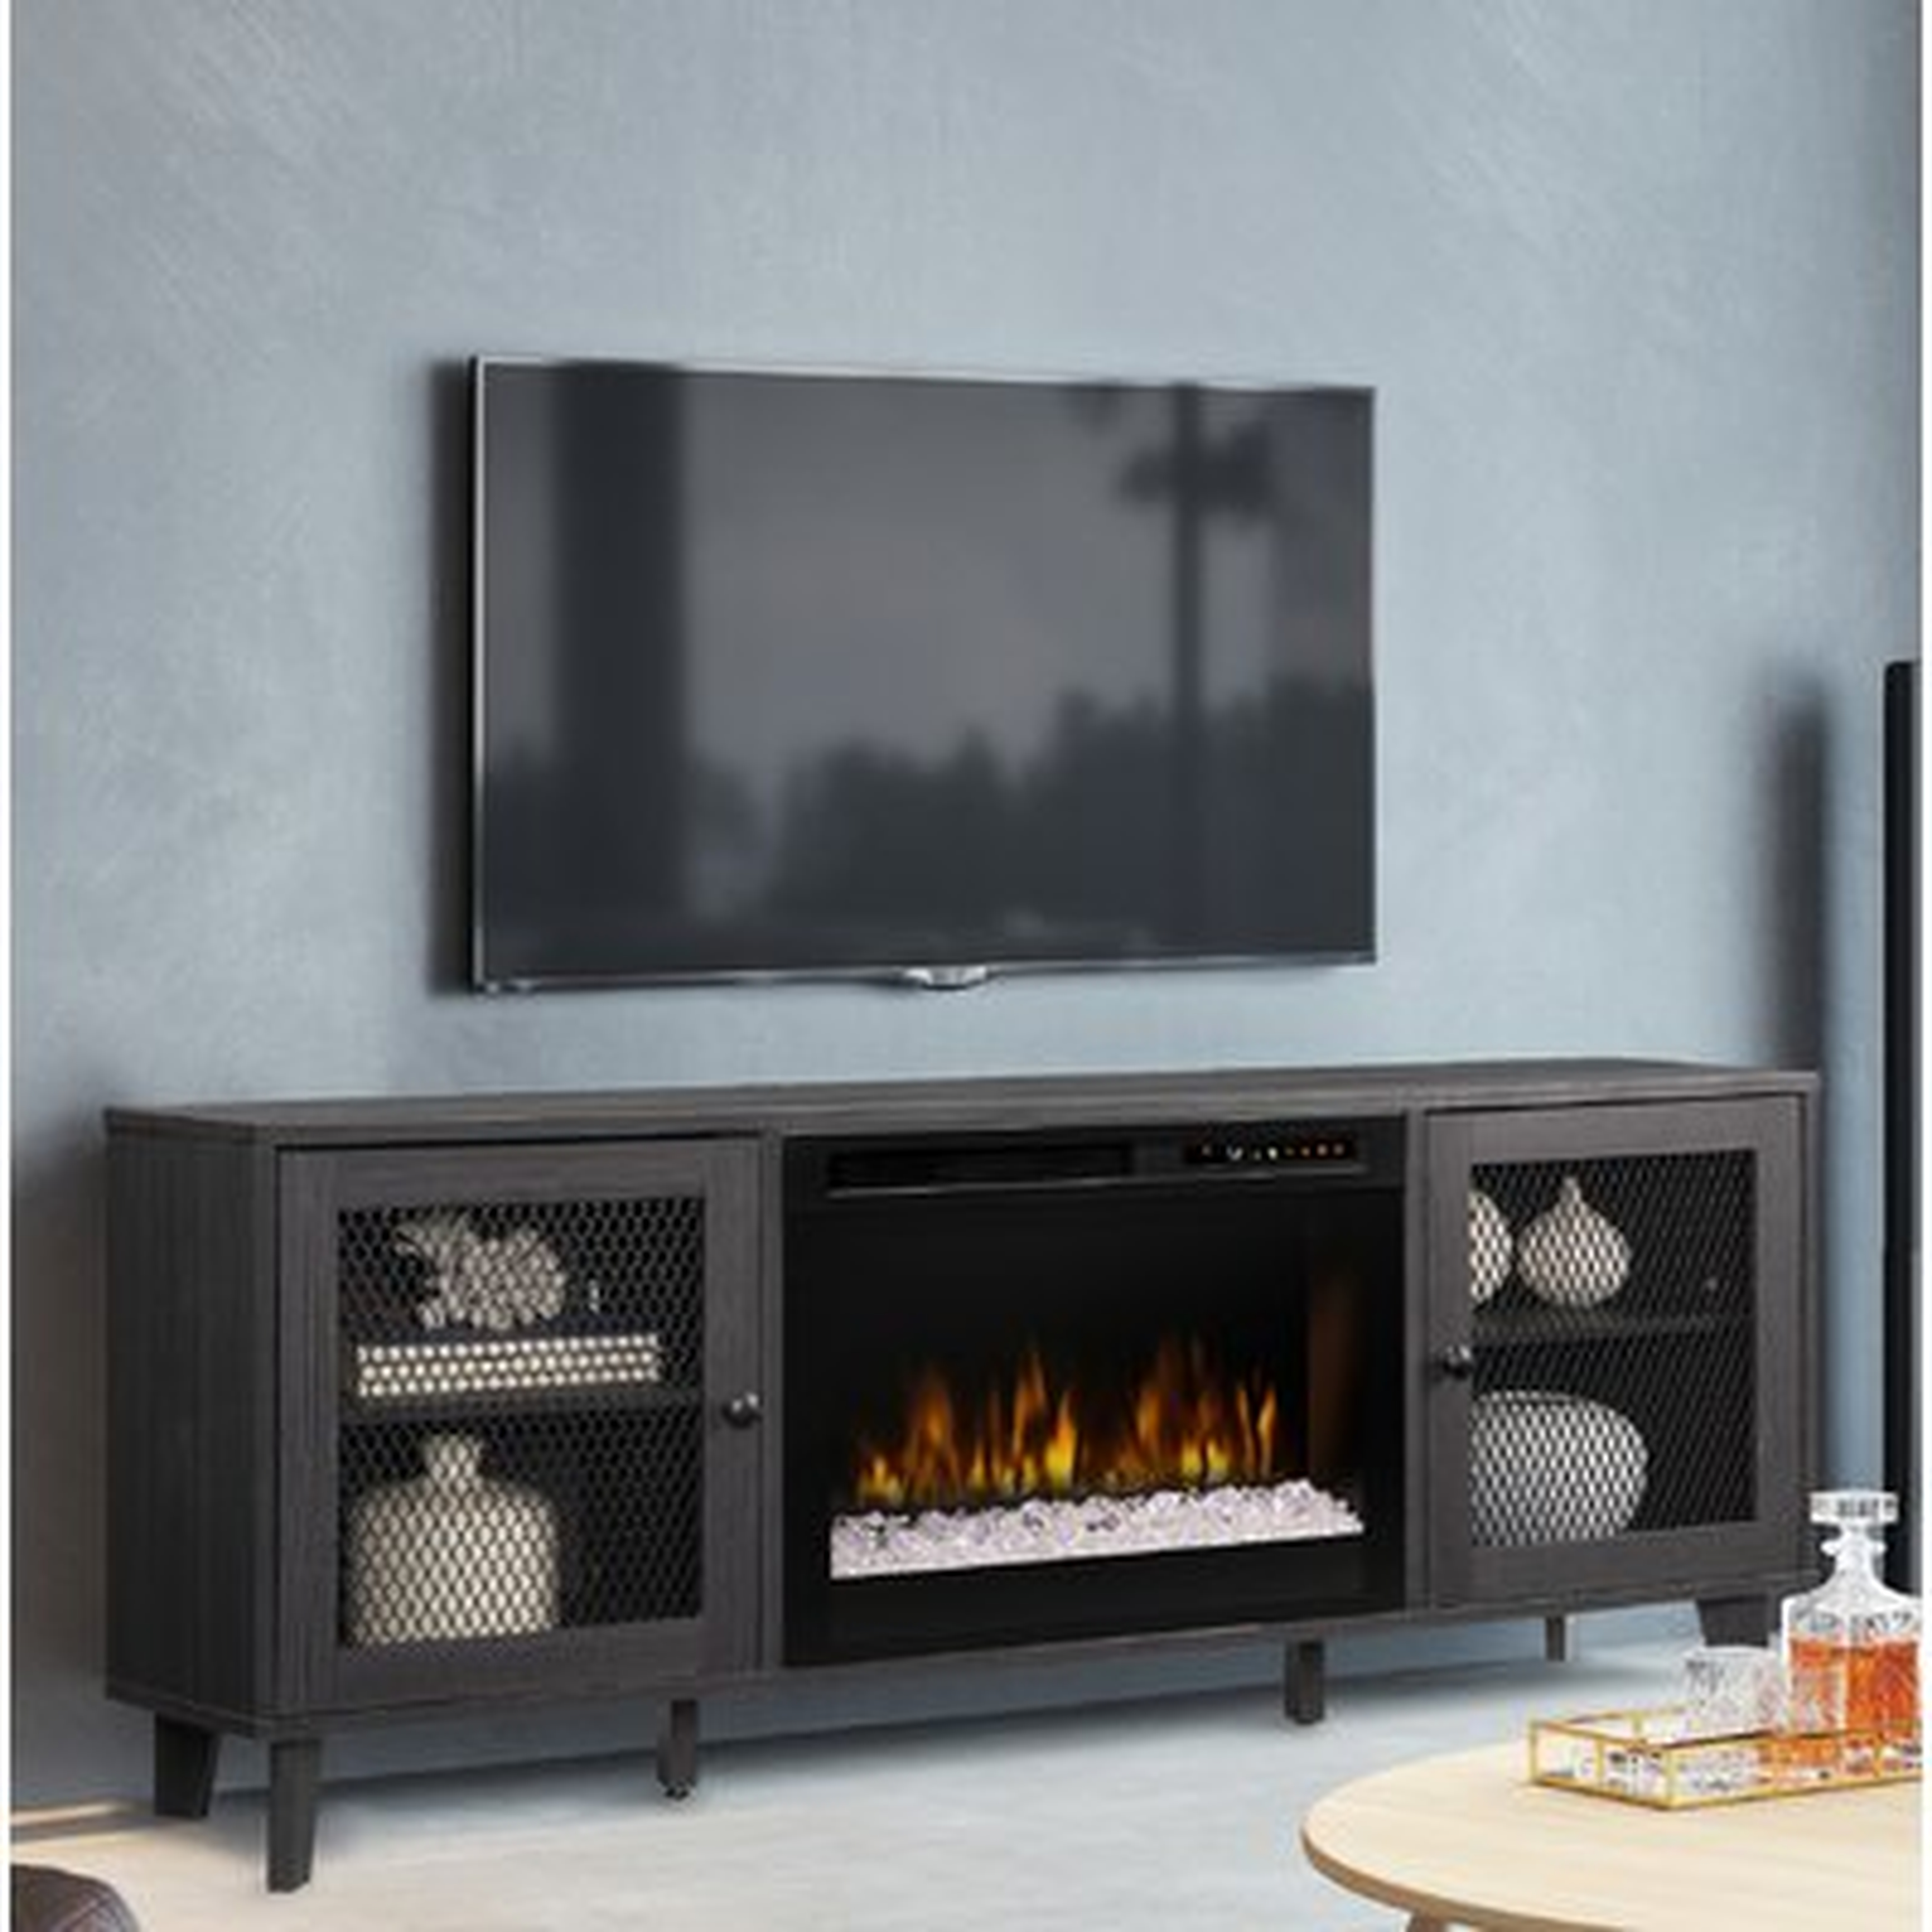 Towe TV Stand for TVs up to 60" with Fireplace - Wayfair